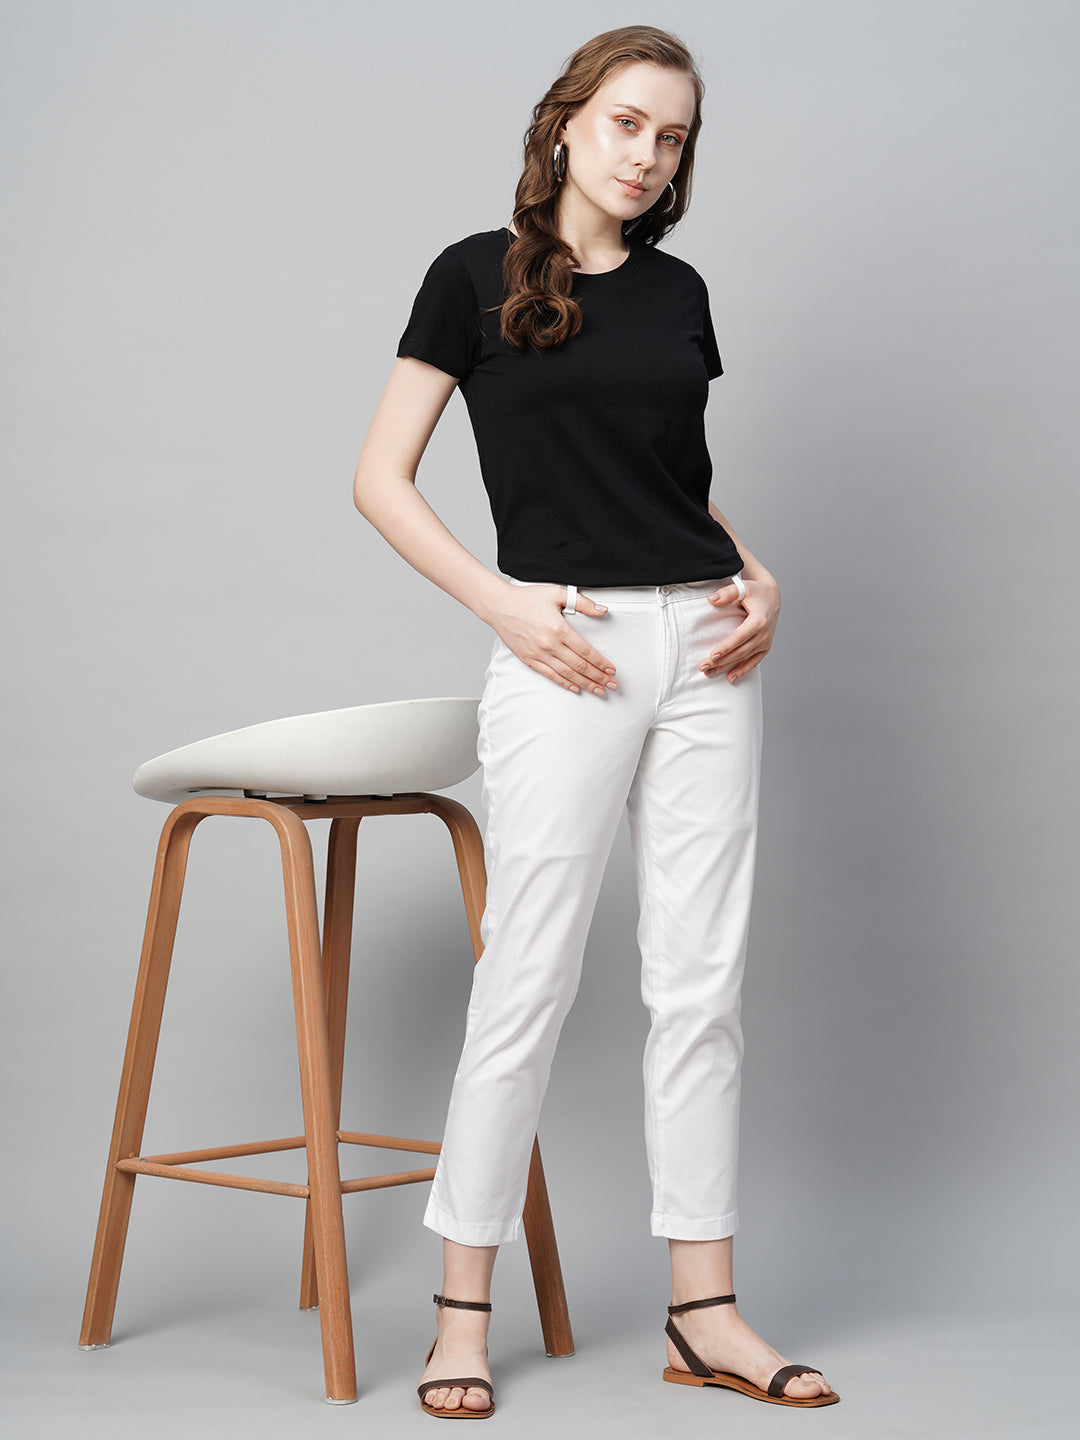 White Cotton Trouser For Women, Solid Regular Fit